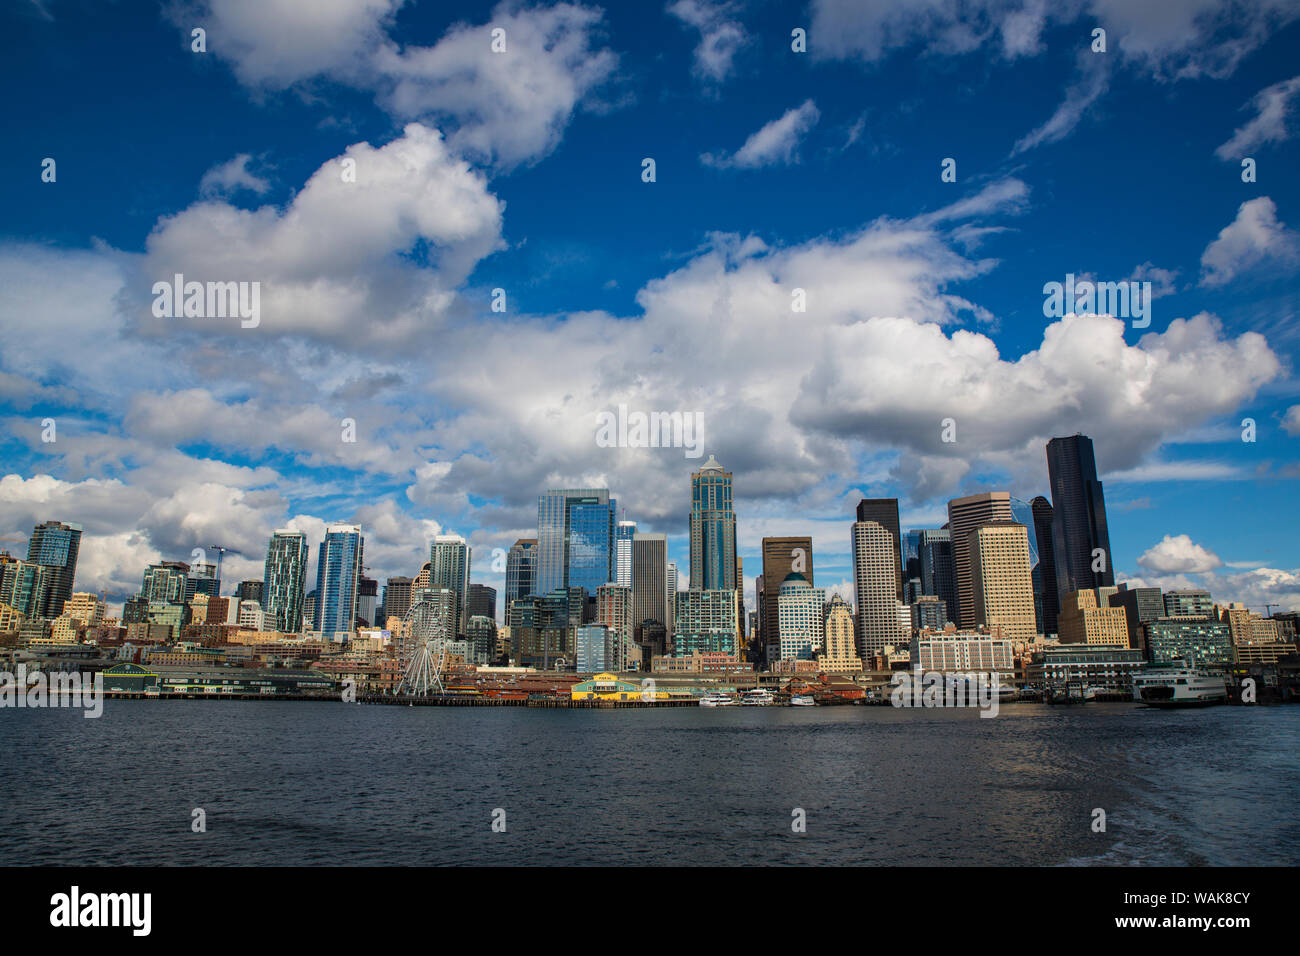 Seattle, Washington State. Skyline and waterfront with a ferry boat Stock Photo